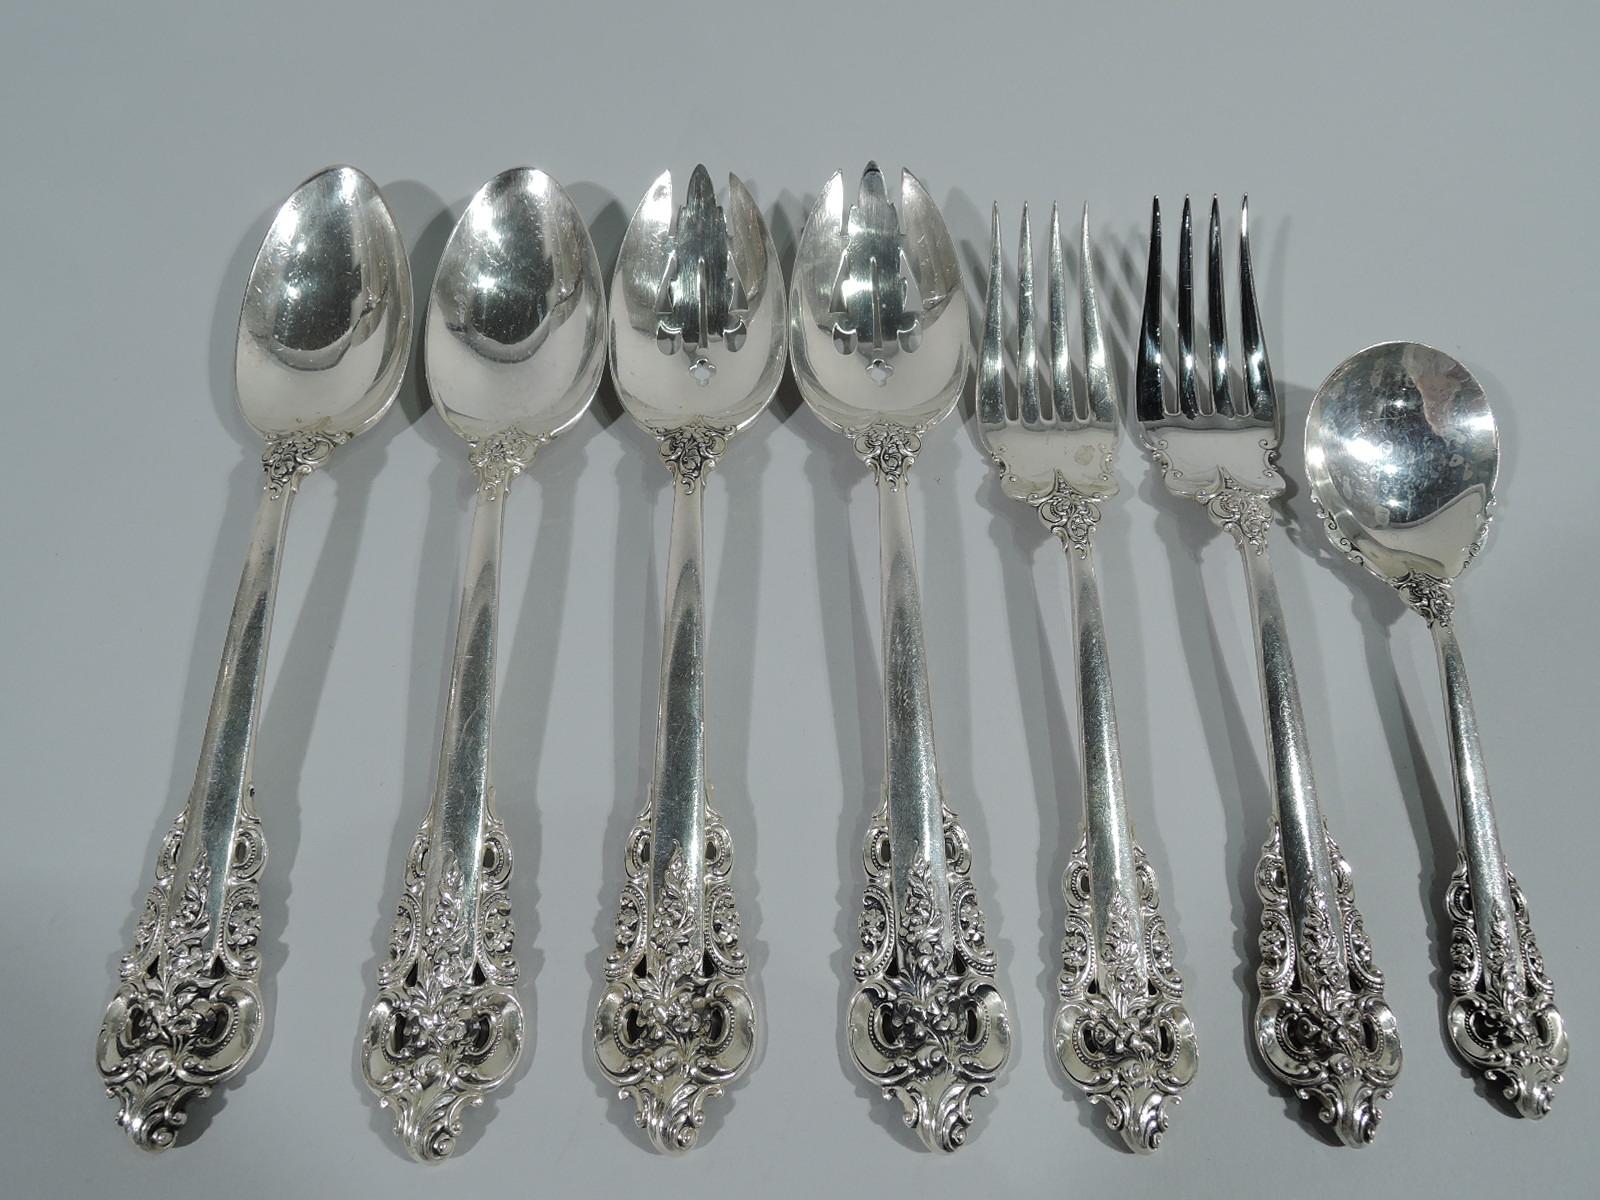 Sterling silver dinner set for 12 in Grande Baroque pattern. Made by Wallace in Wallingford, Conn.

This set comprises 96 pieces (dimensions in inches): Forks: 12 dinner forks (8), 13 salad forks (6 5/8), and 12 seafood forks (5 3/8); Spoons: 12